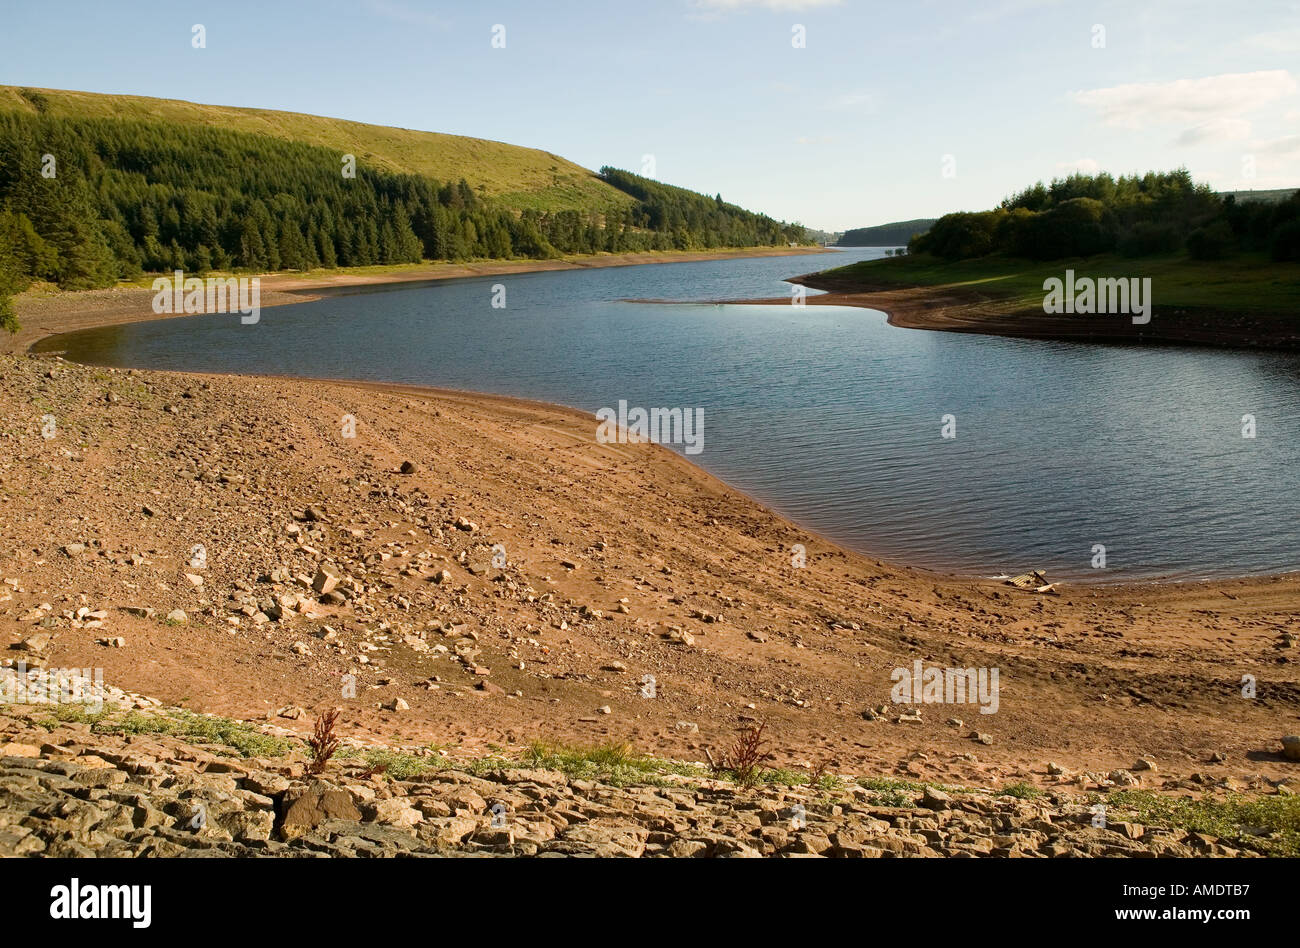 Low water conditions in Pontsticill reservoir 'Brecon Beacons' Wales UK Stock Photo